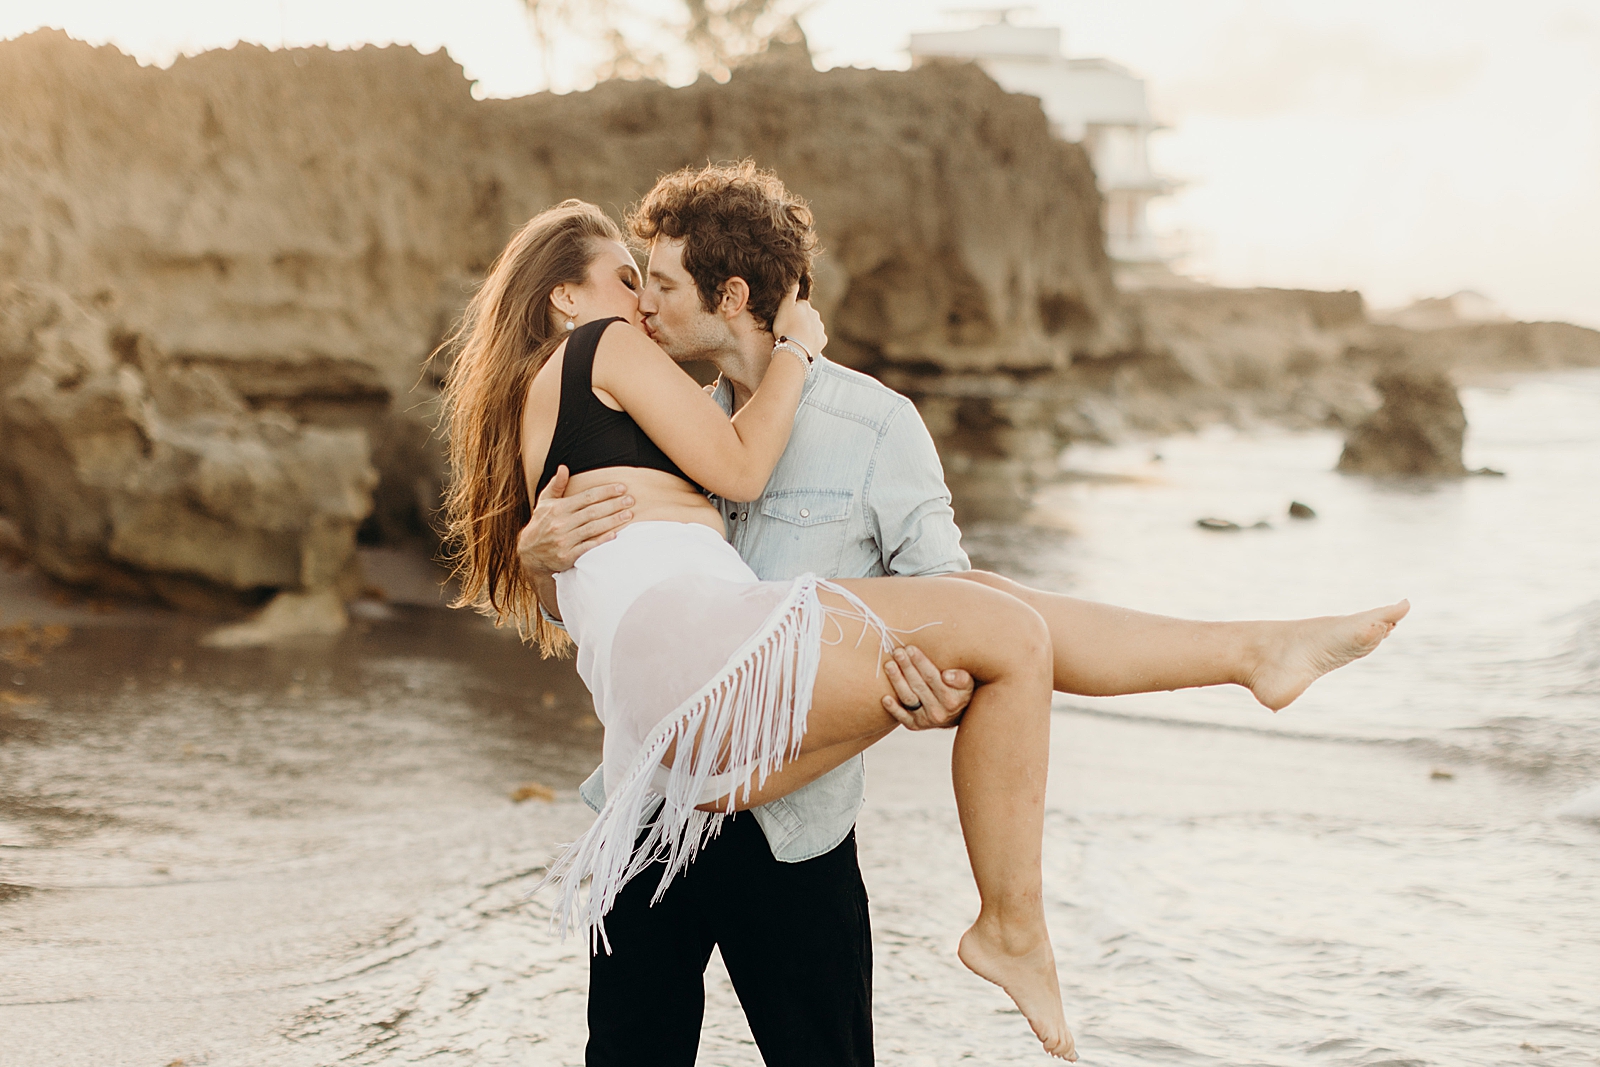 Man holding woman and kissing her with beach rocks behind them